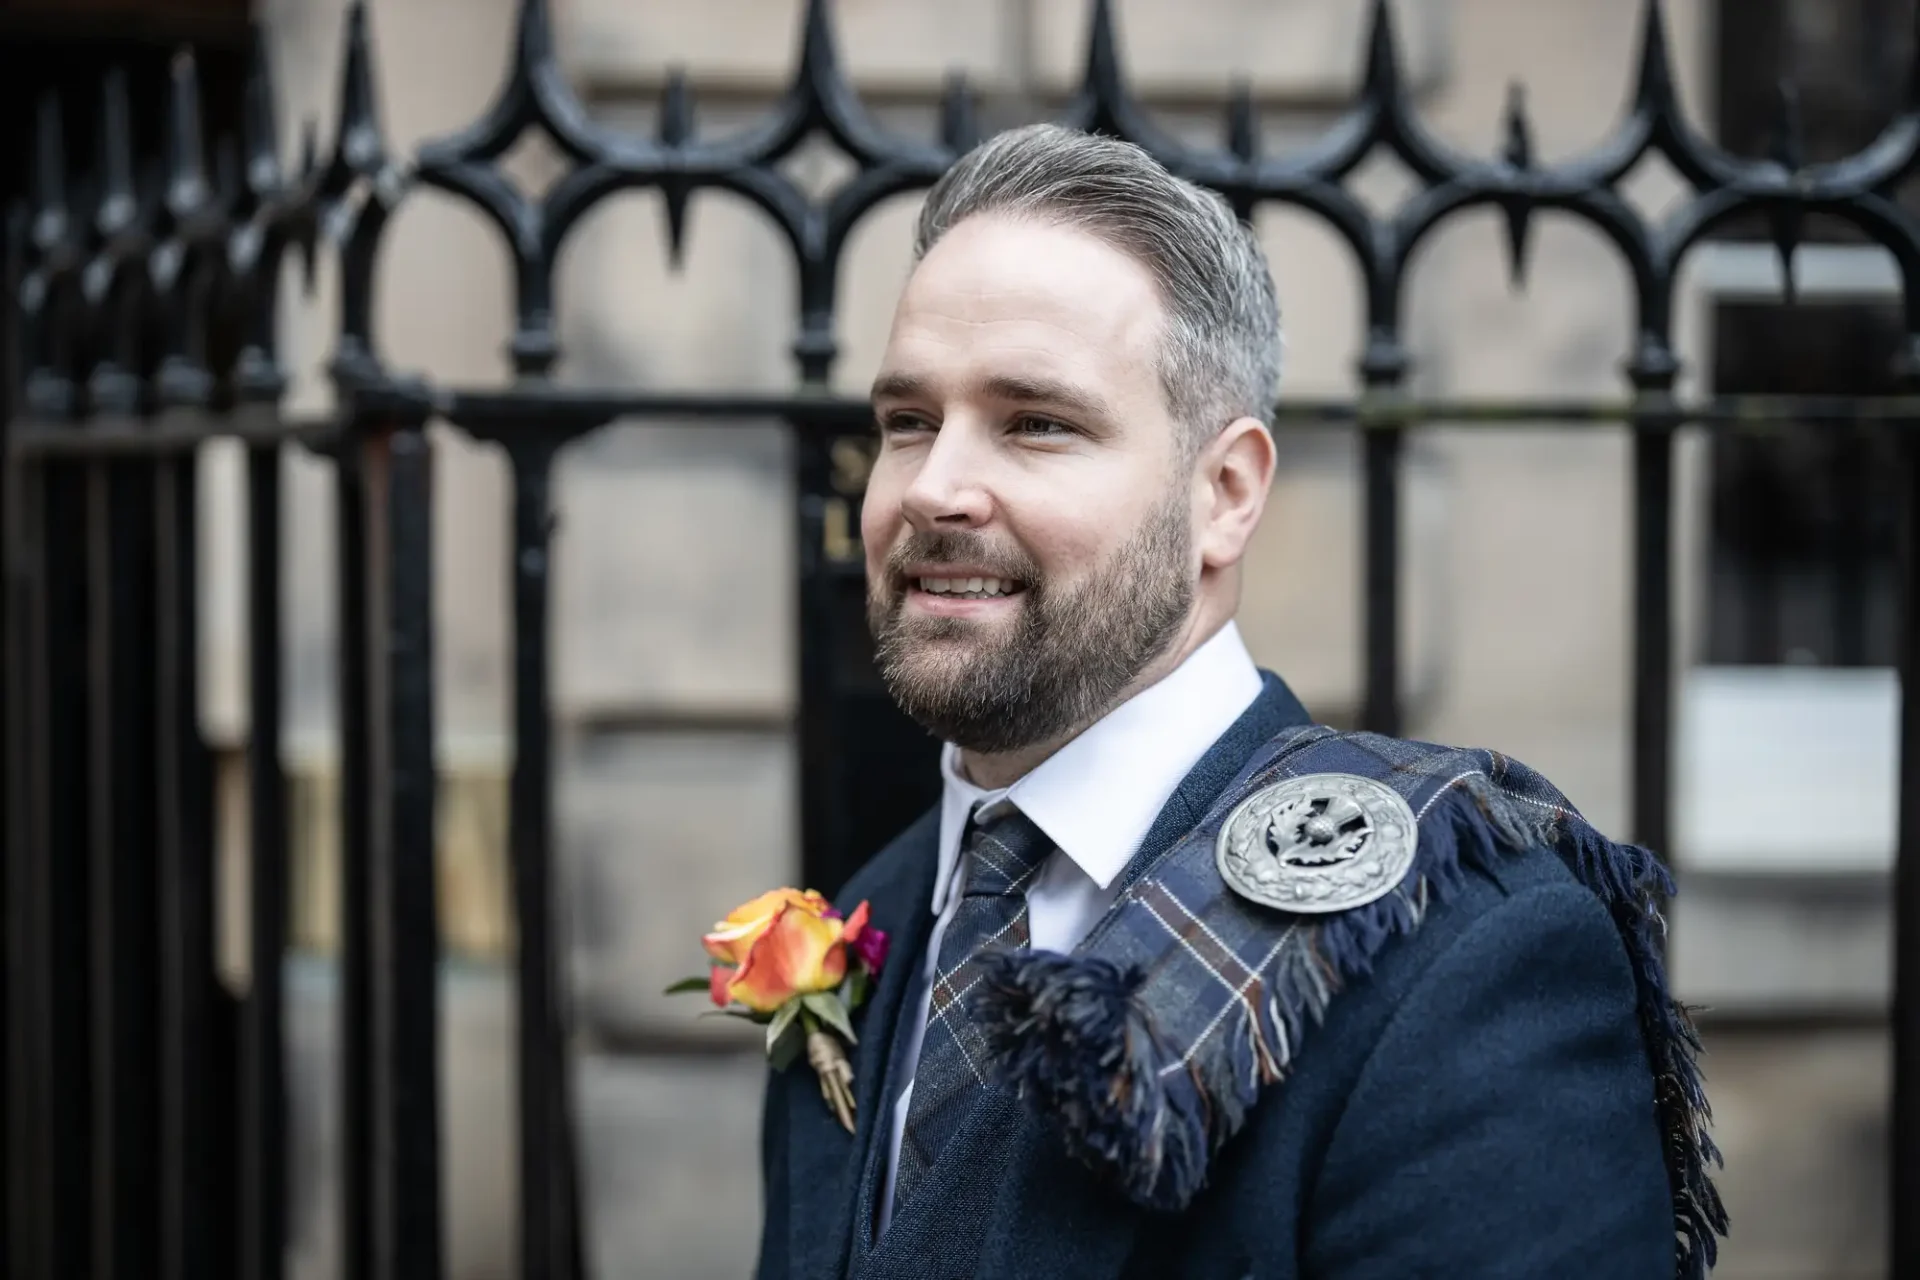 Man in a traditional kilt and tweed jacket, smiling outside a building with iron fence, wearing a boutonniere.